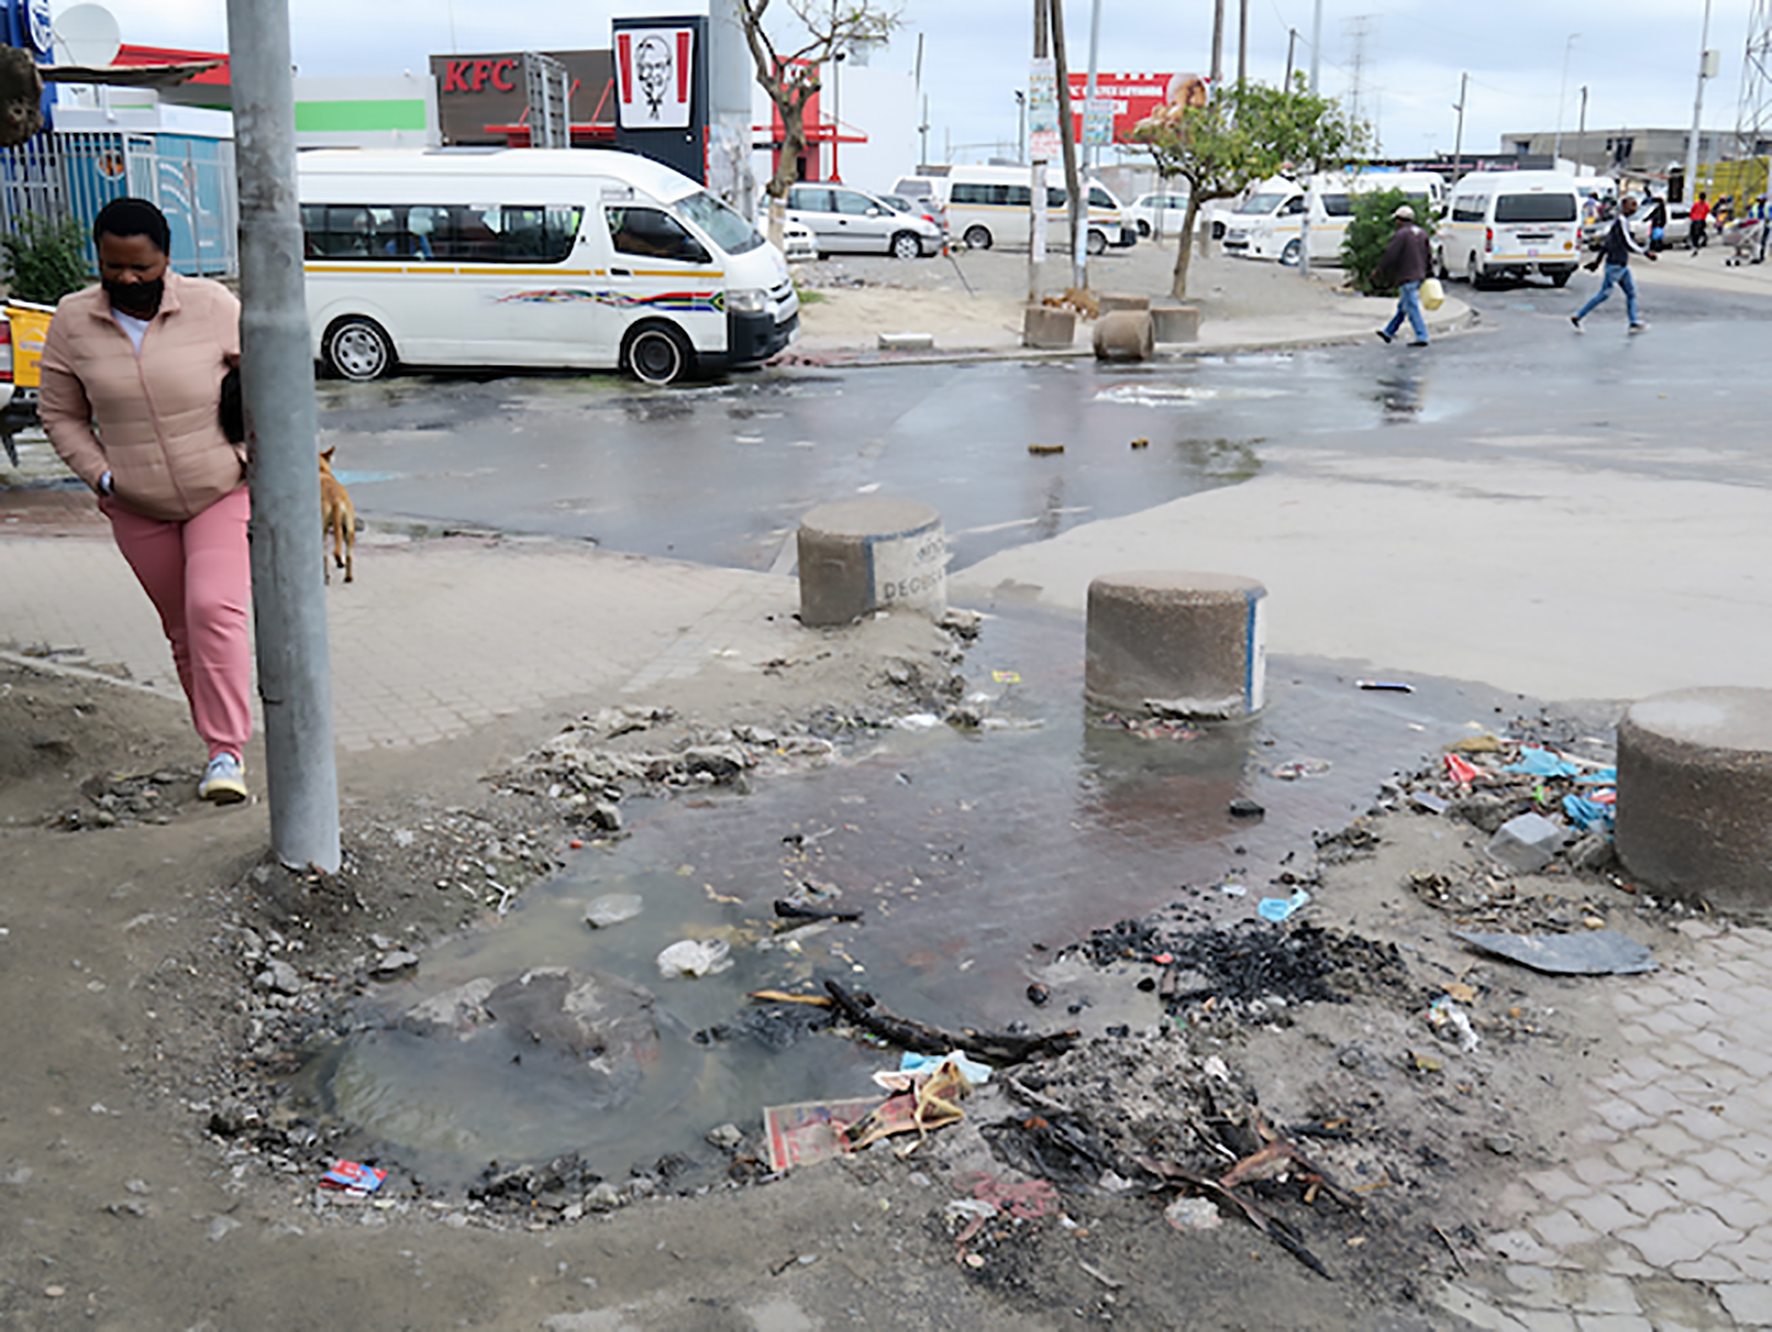 A street in Khayelitsha Site C with sewage overflowing from a manhole cover